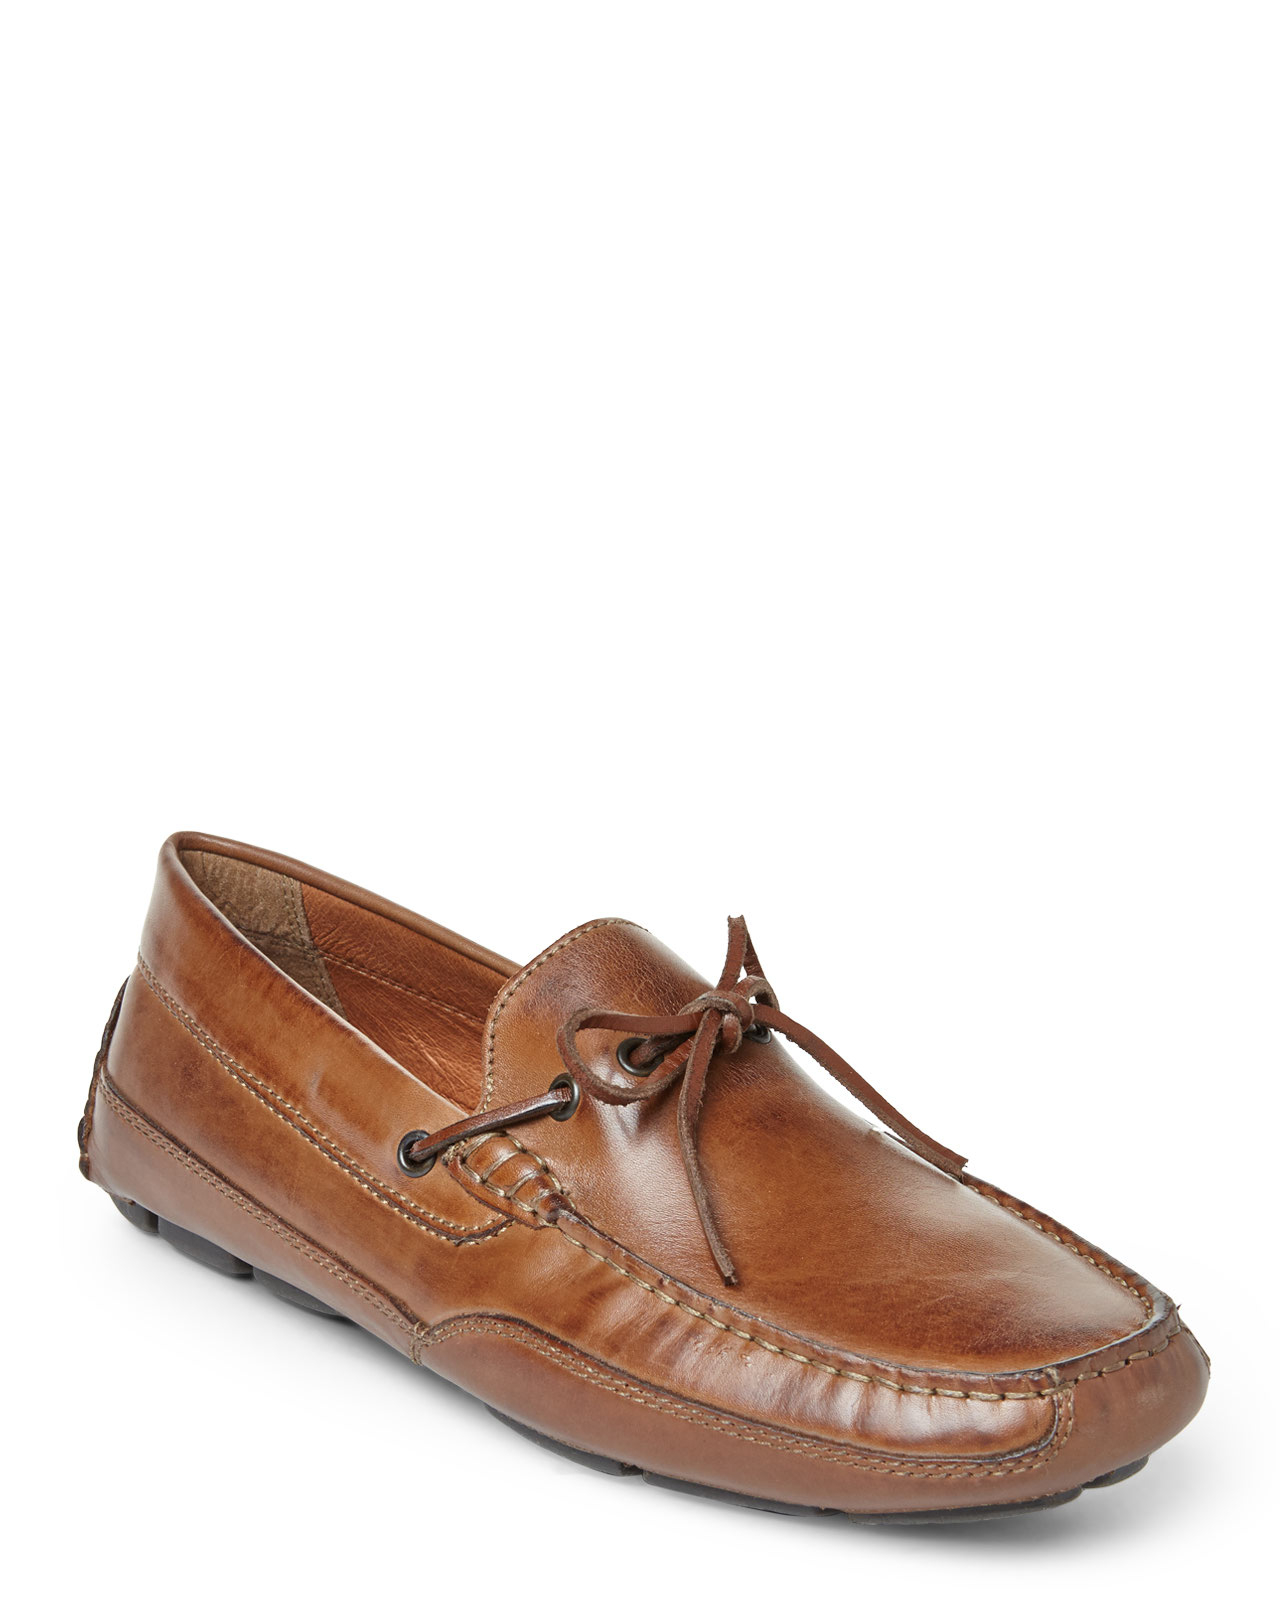 G.h. bass & co. Tan Driving Moccasins in Brown for Men | Lyst